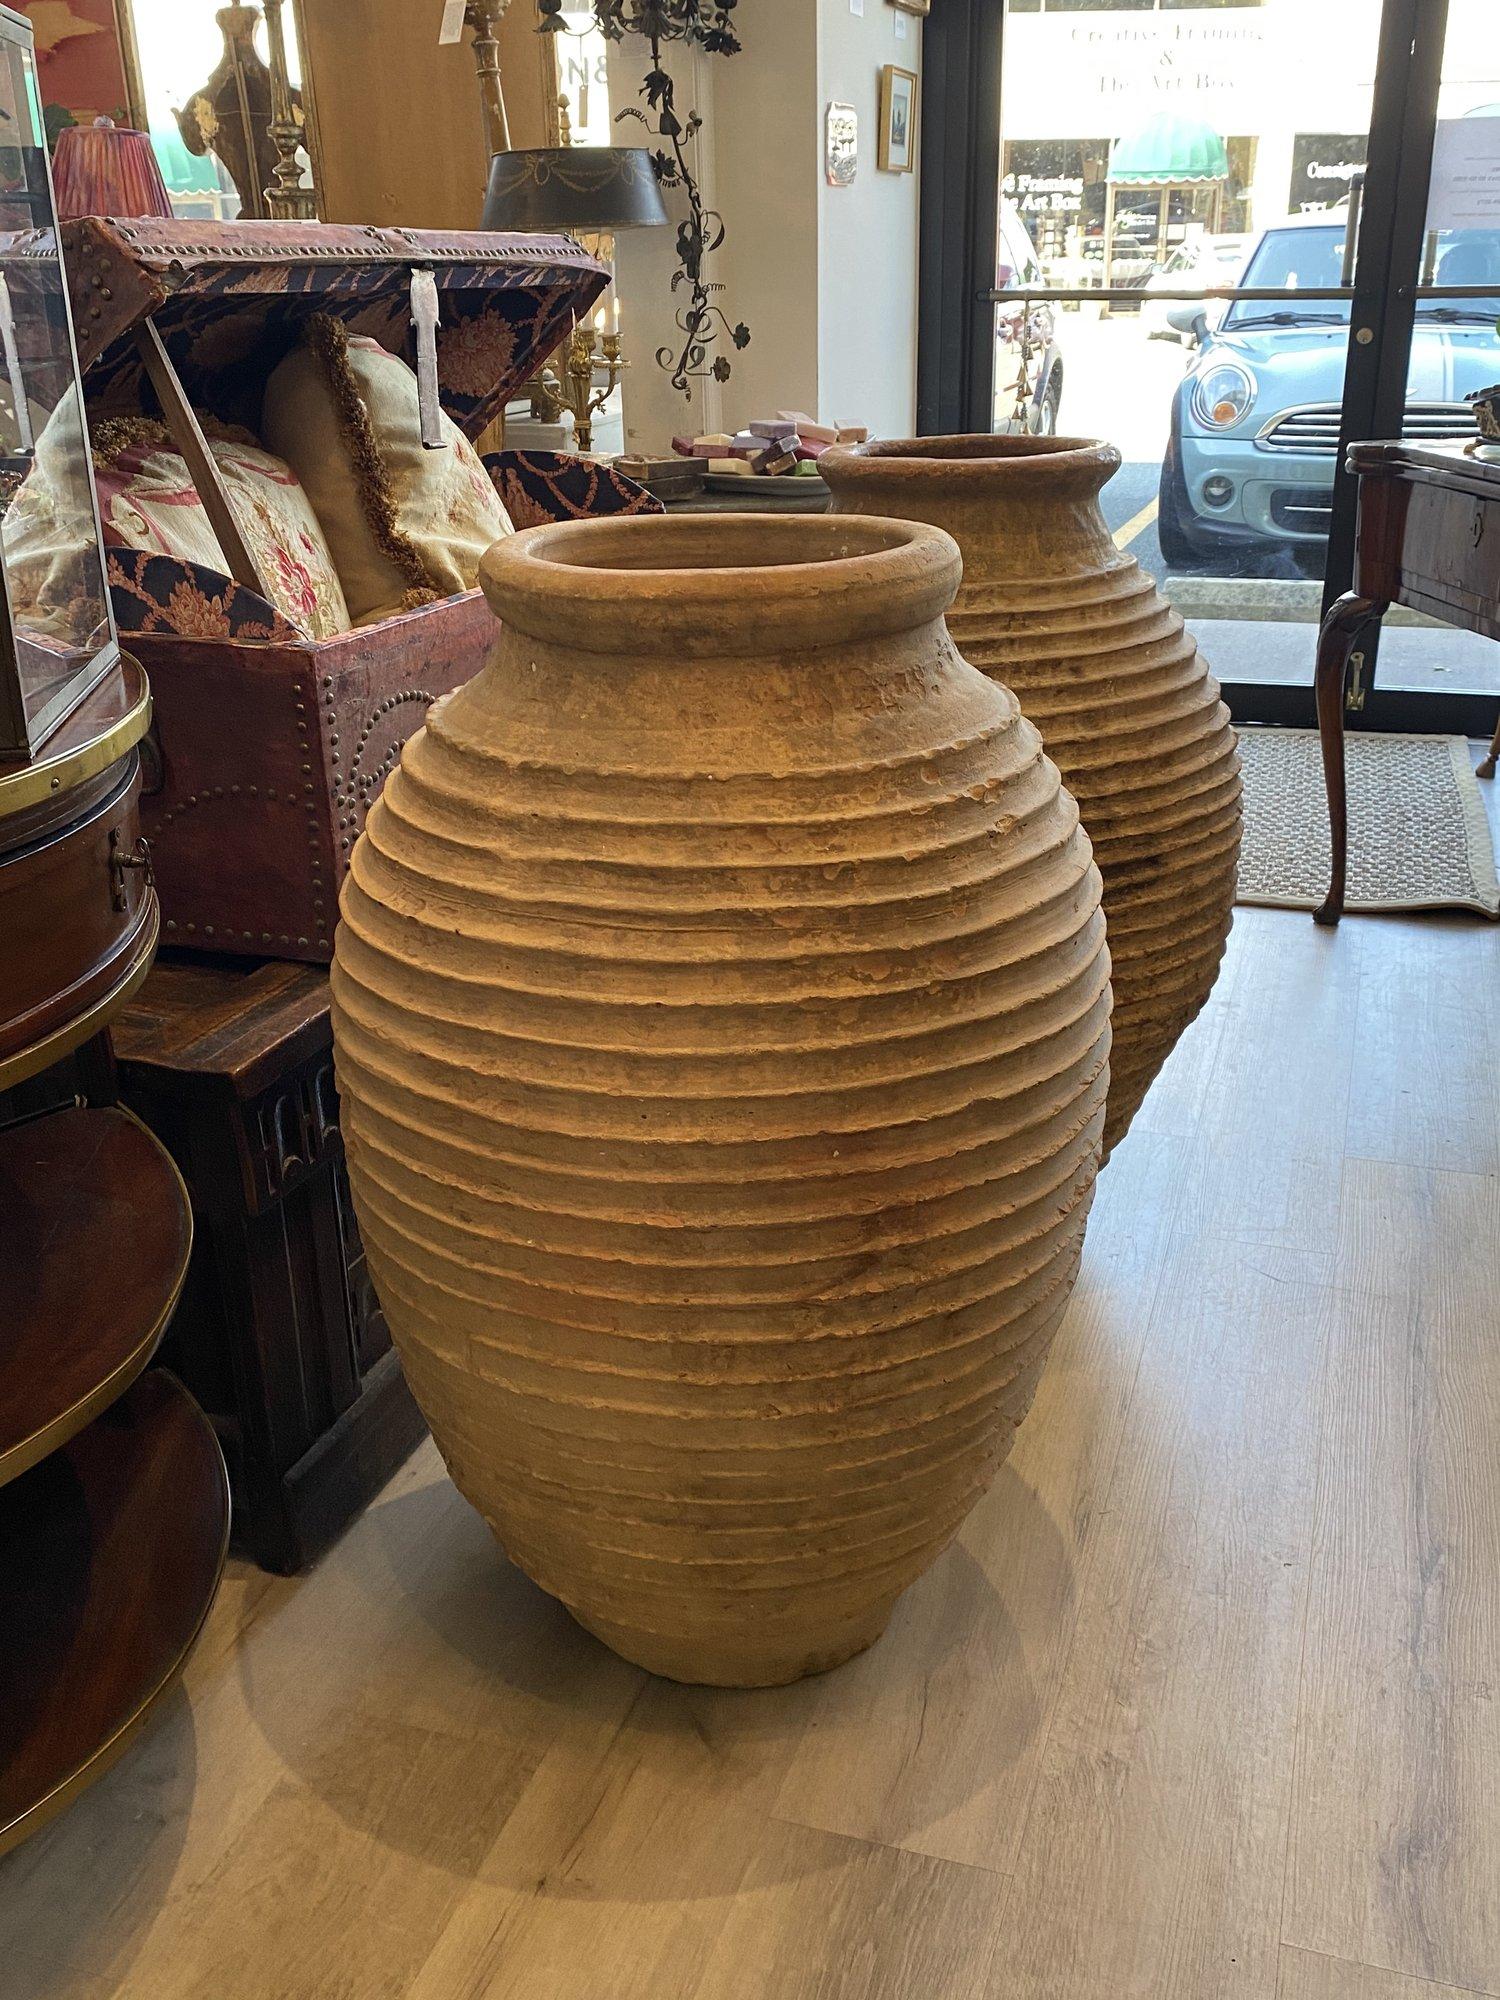 Clay Large Peloponnesian Olive Oil Jars, Planters, Early 19th Century